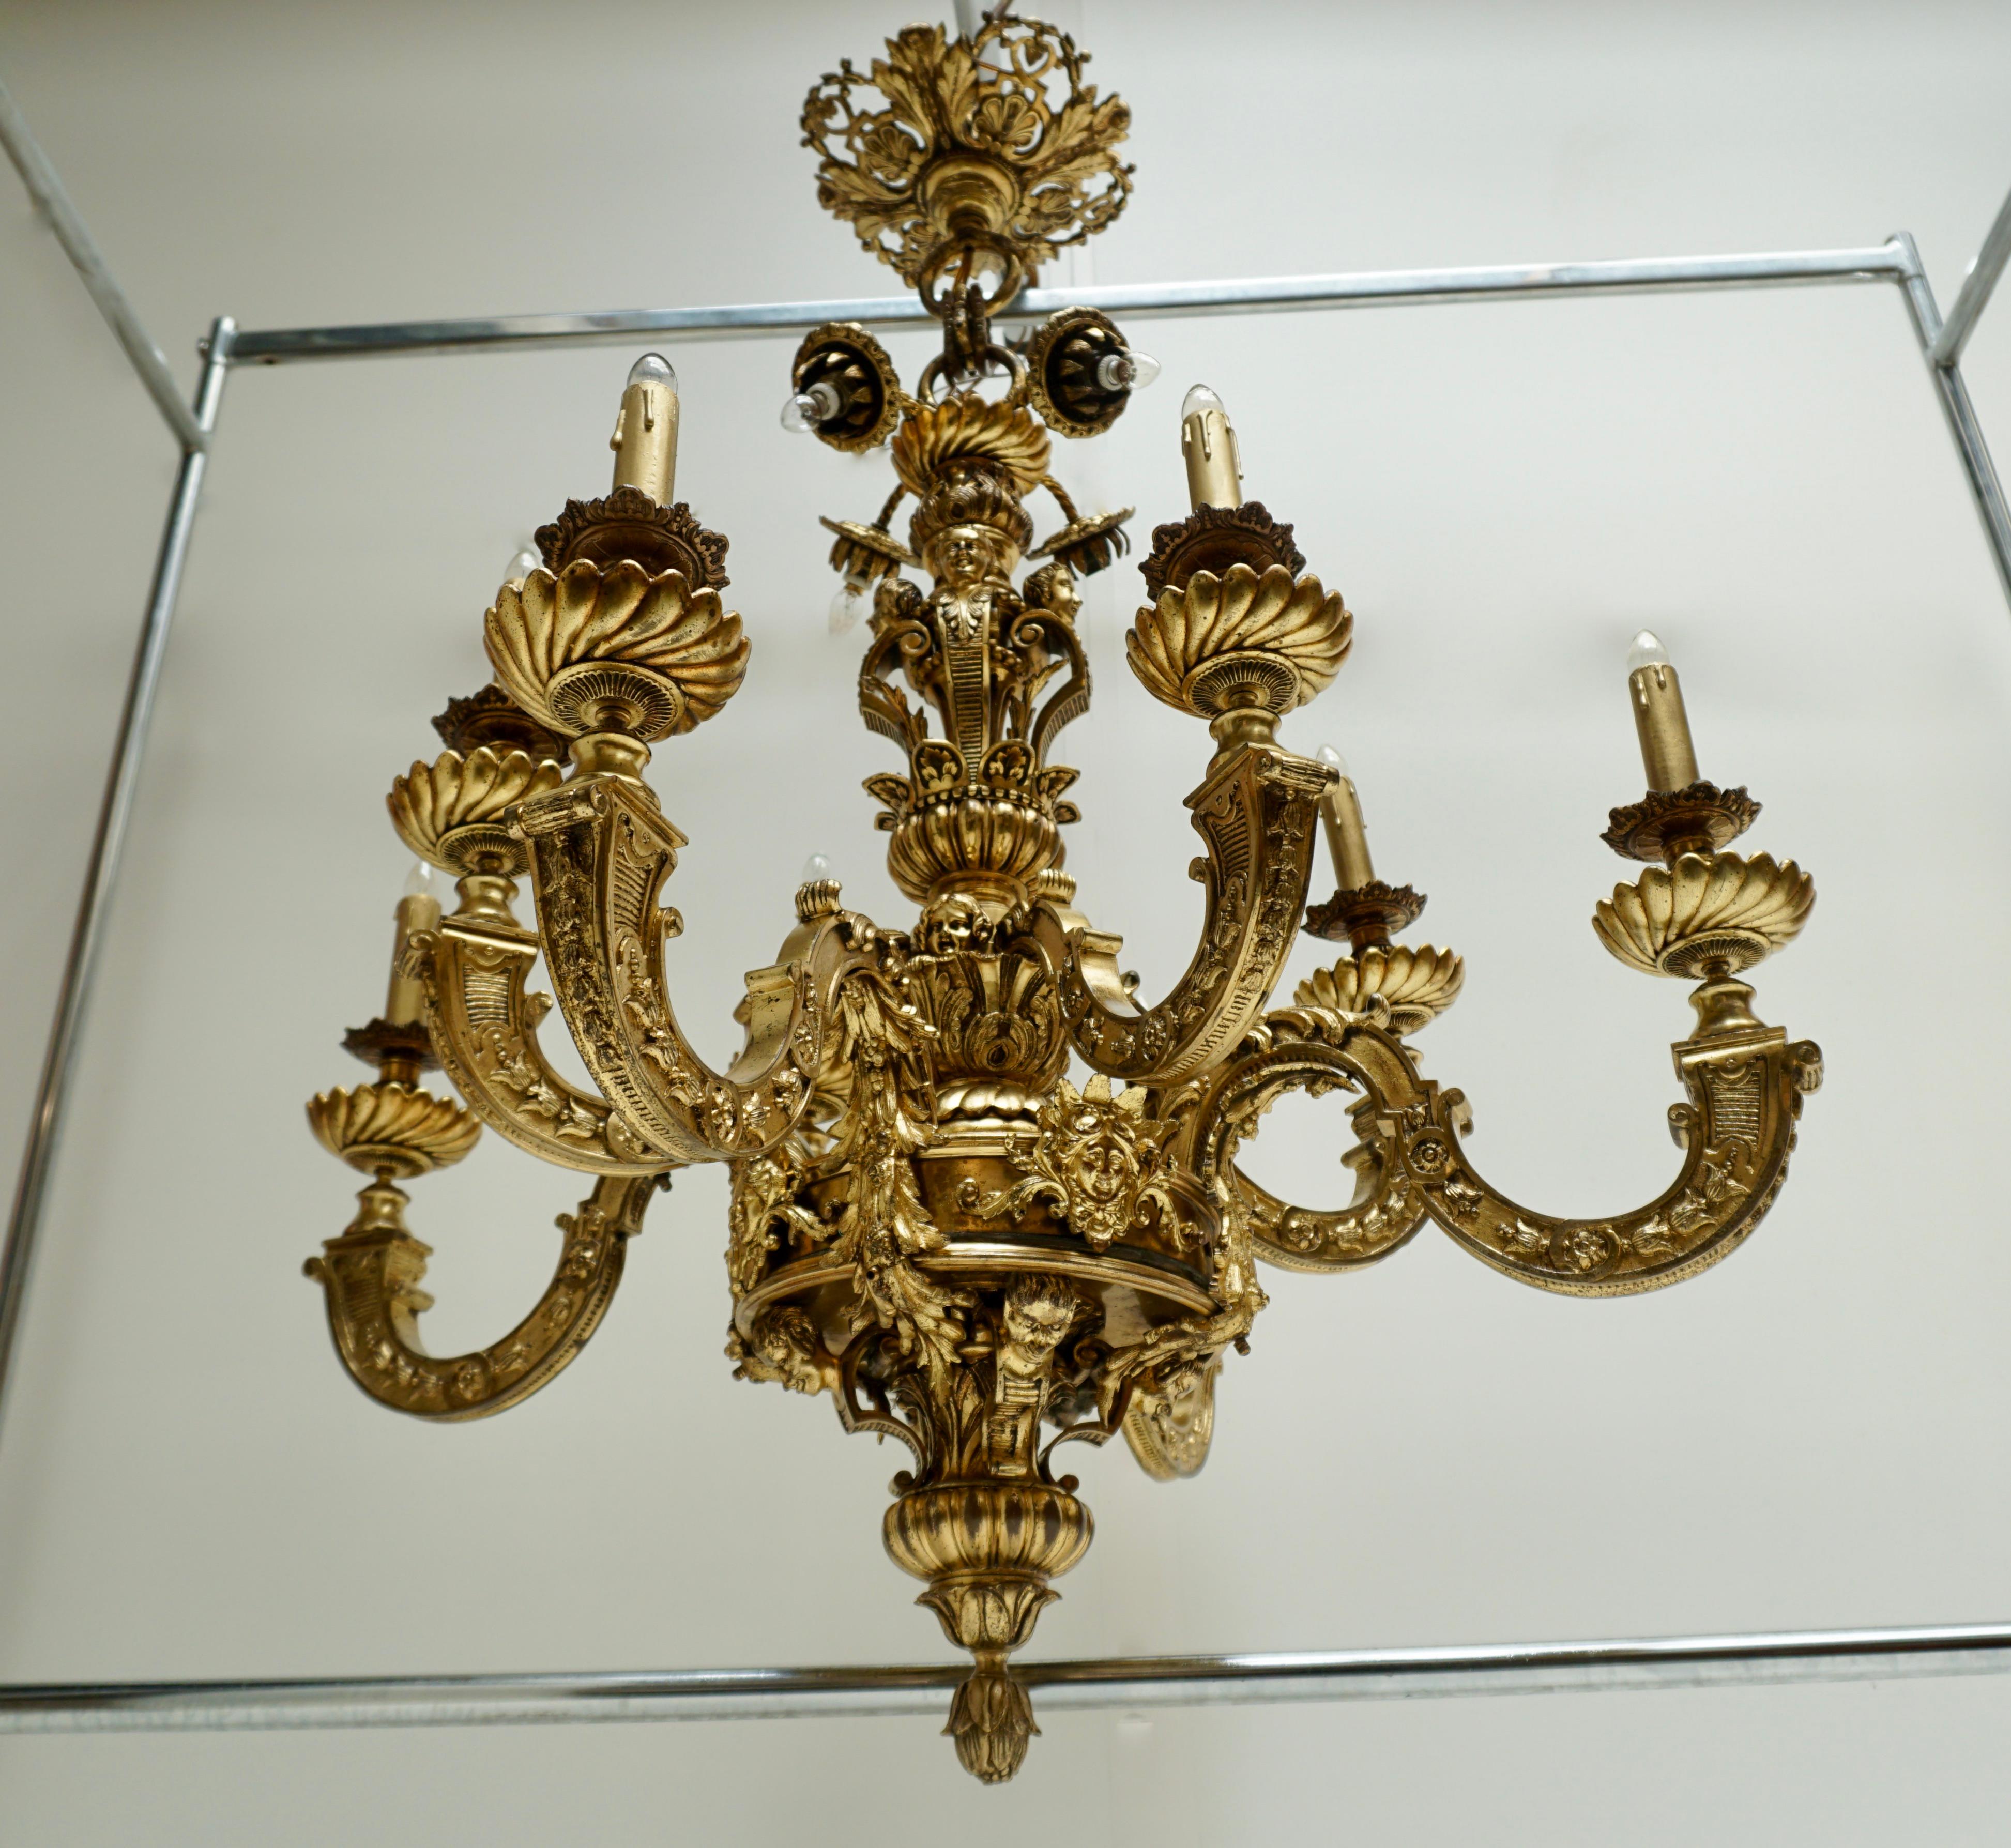 A spectacular and important bronze chandelier, a so called “Lustre Mazarin”, of superb quality, with 8 arms and above these, 4 lights and in the middle of the balluster 4 heads on scrolls , and underneath 4 angel-heads. The chandelier dates from the